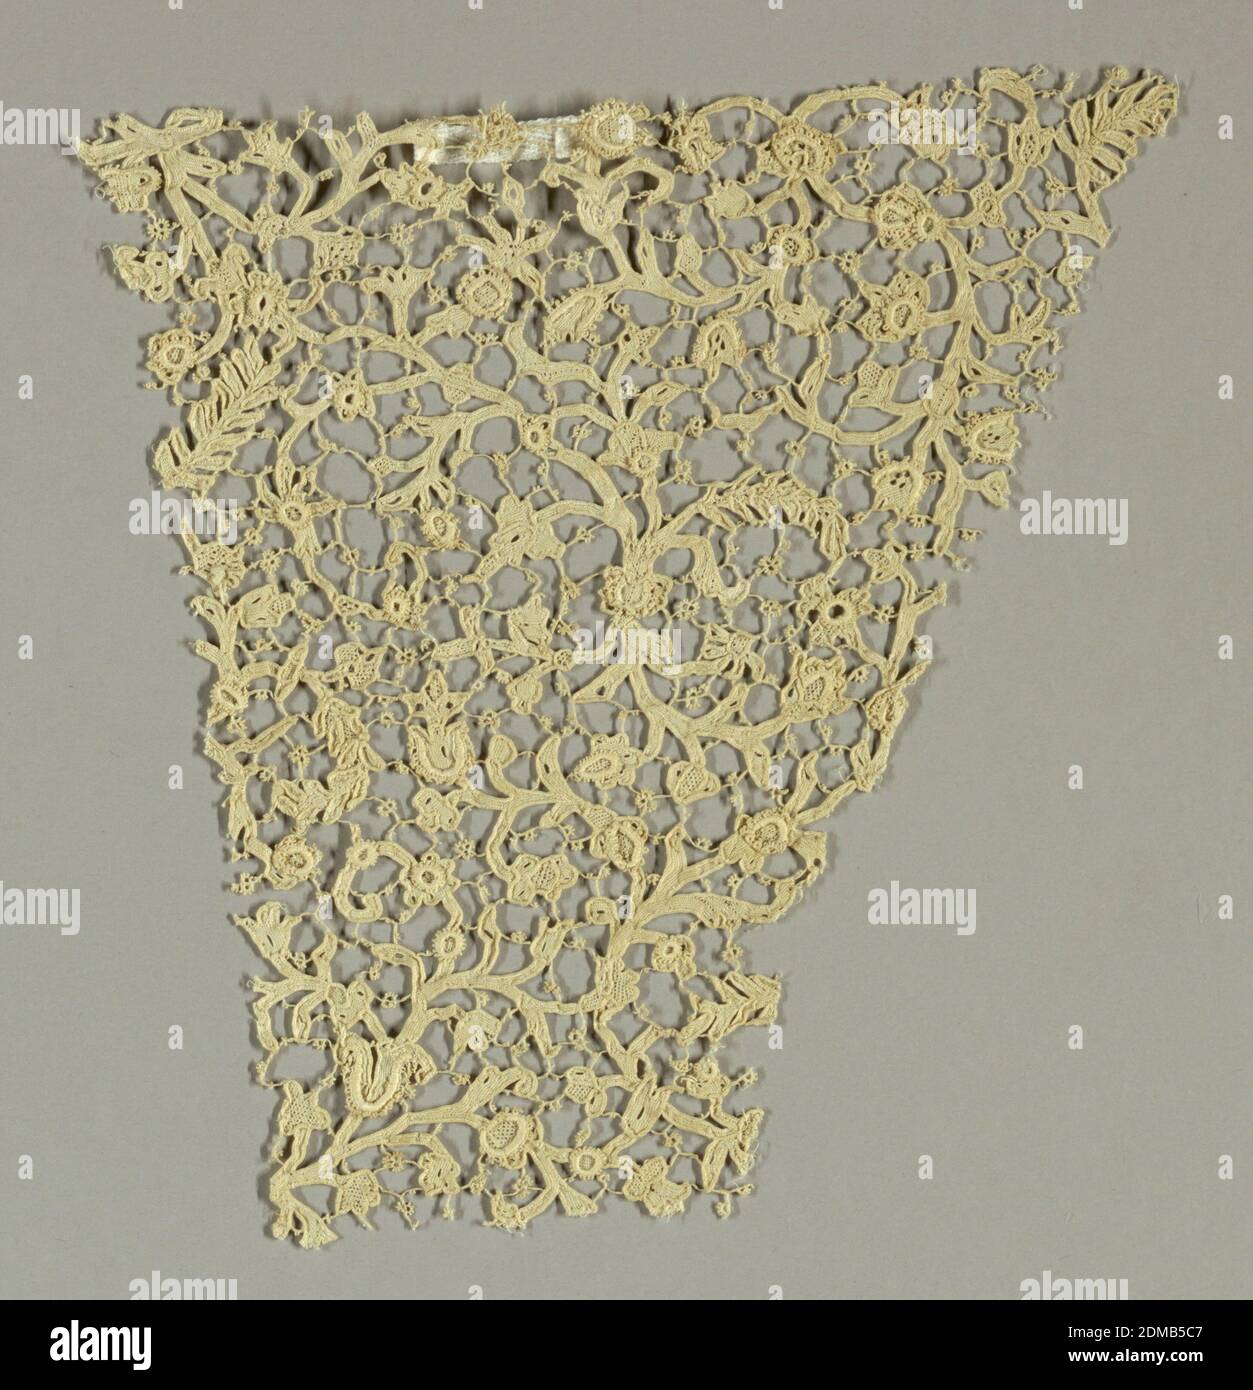 Fragment, Medium: linen Technique: needle lace, Fragment with a delicate vine and flower pattern has raised three-dimensional details. Pattern areas connected by brides with wheels and picots., Italy, 17th century, lace, Fragment Stock Photo